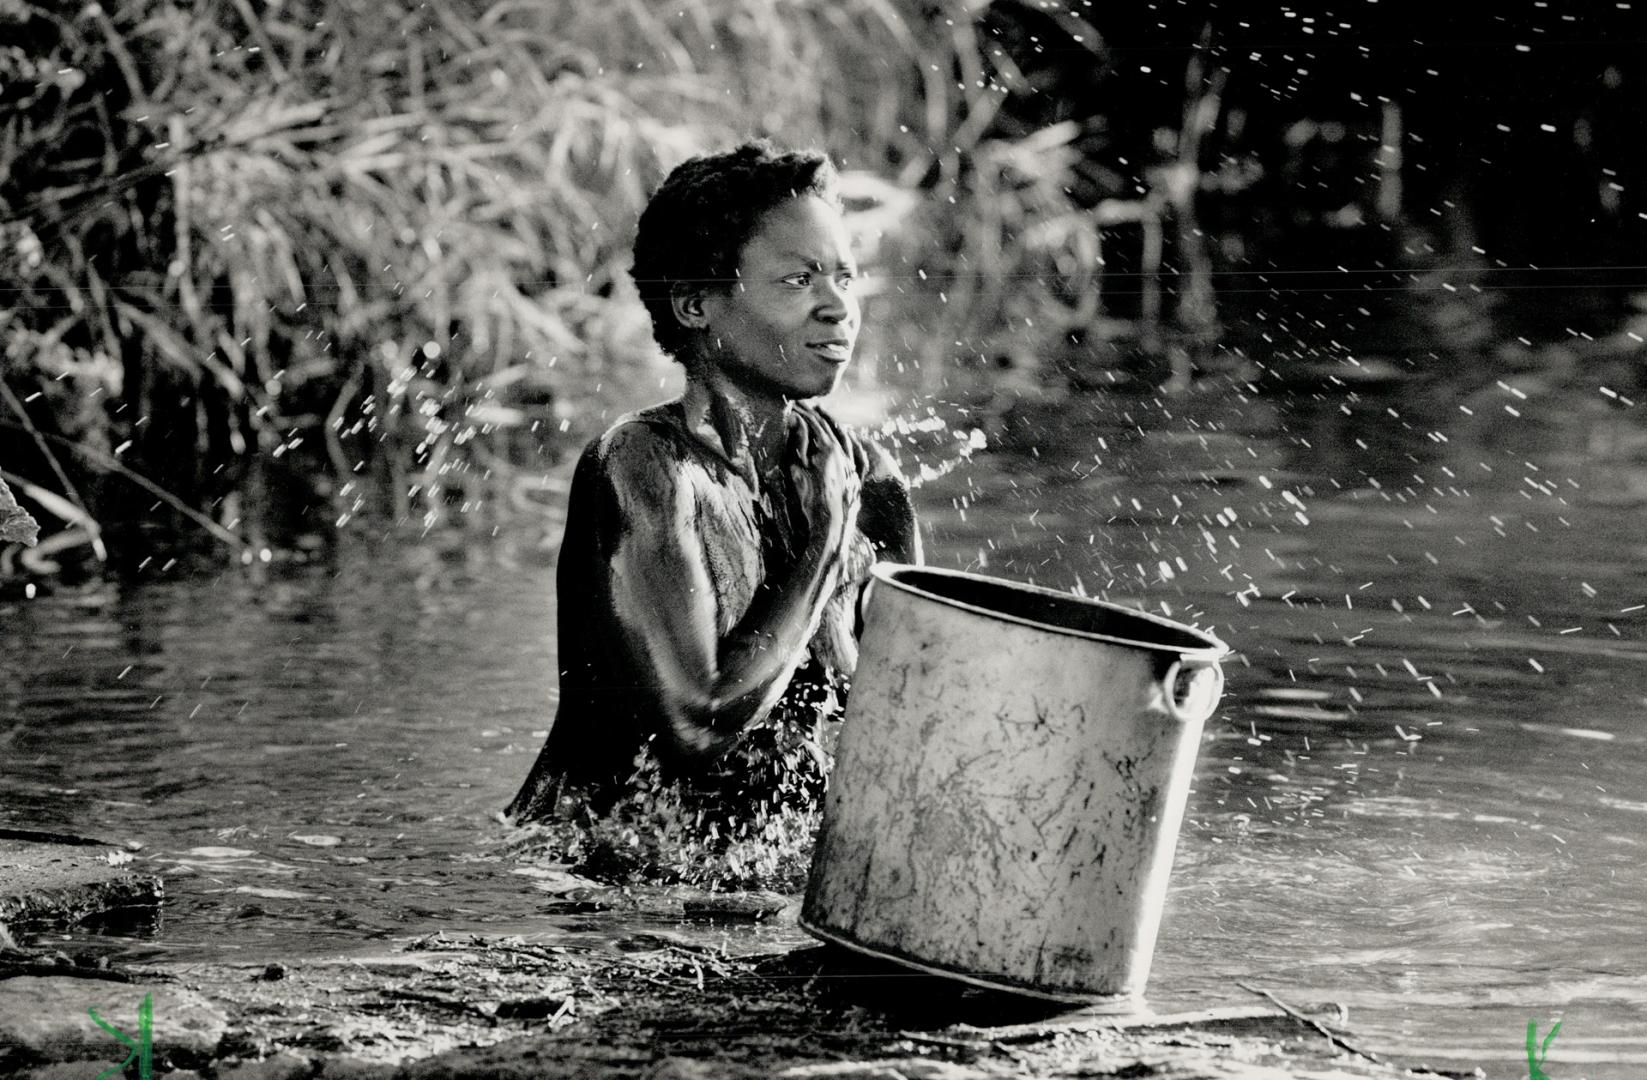 Kneeling in a nearby stream, a village girl showers herself with an aluminium pot